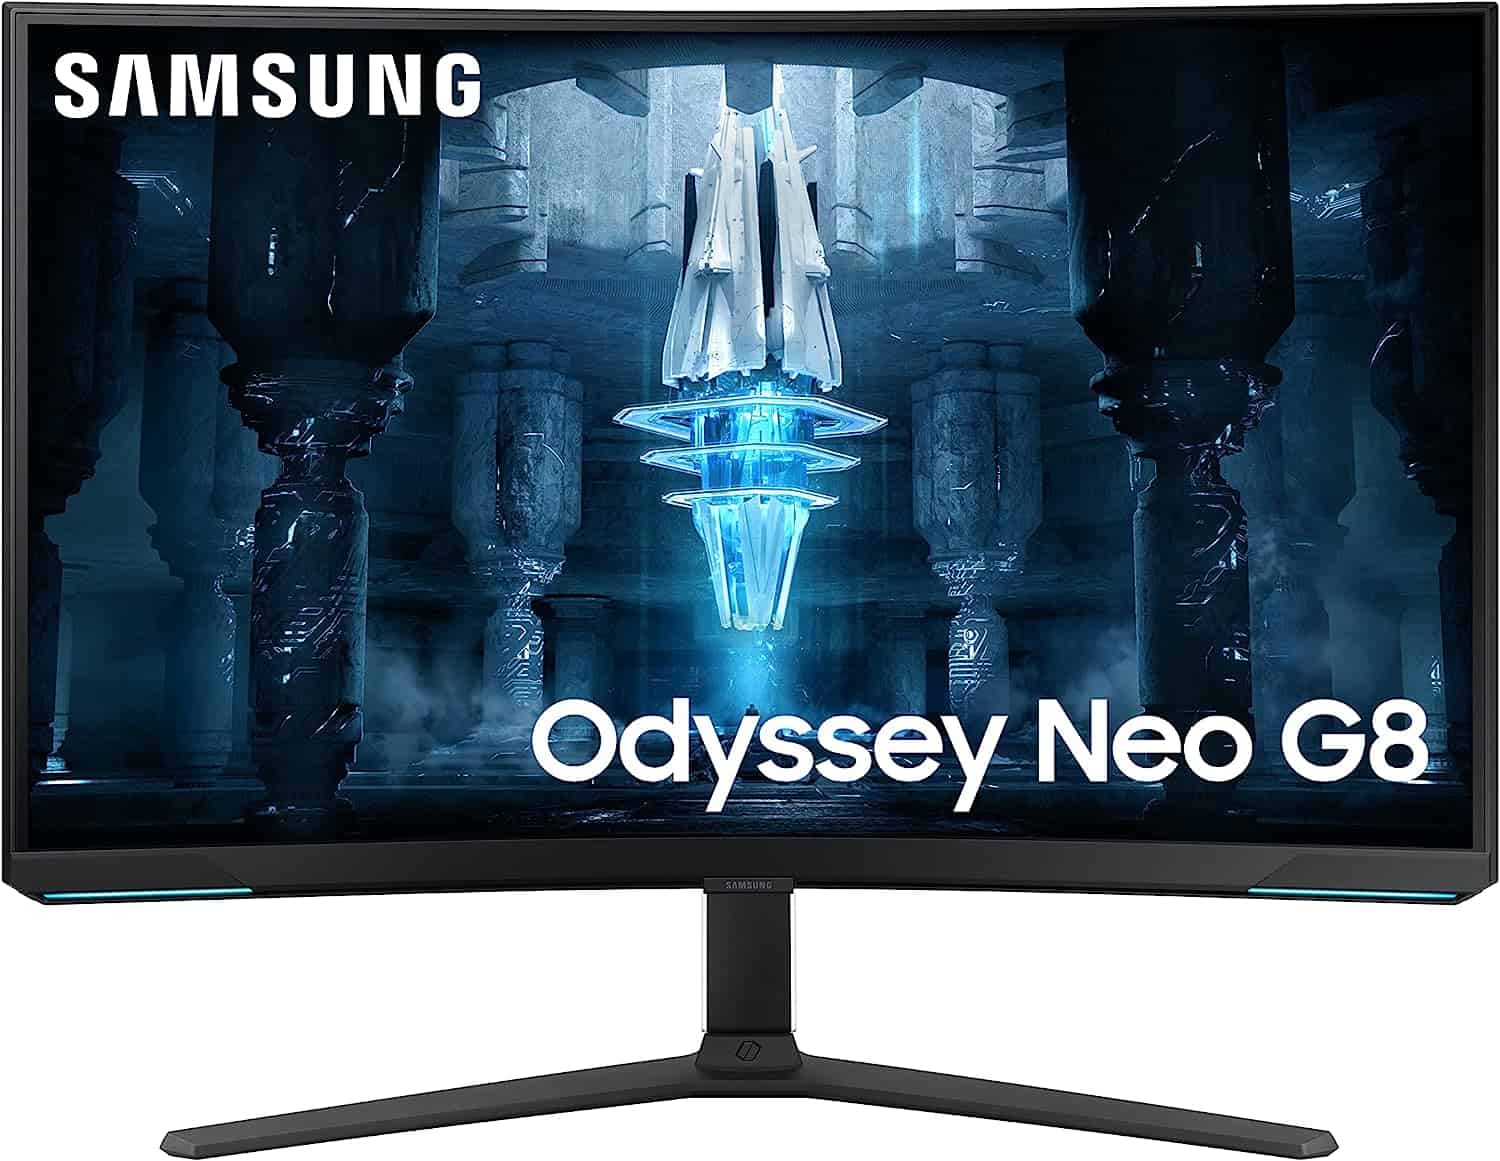 Samsung curved gaming monitor gets a substantial price cut in  deal -  PC Guide